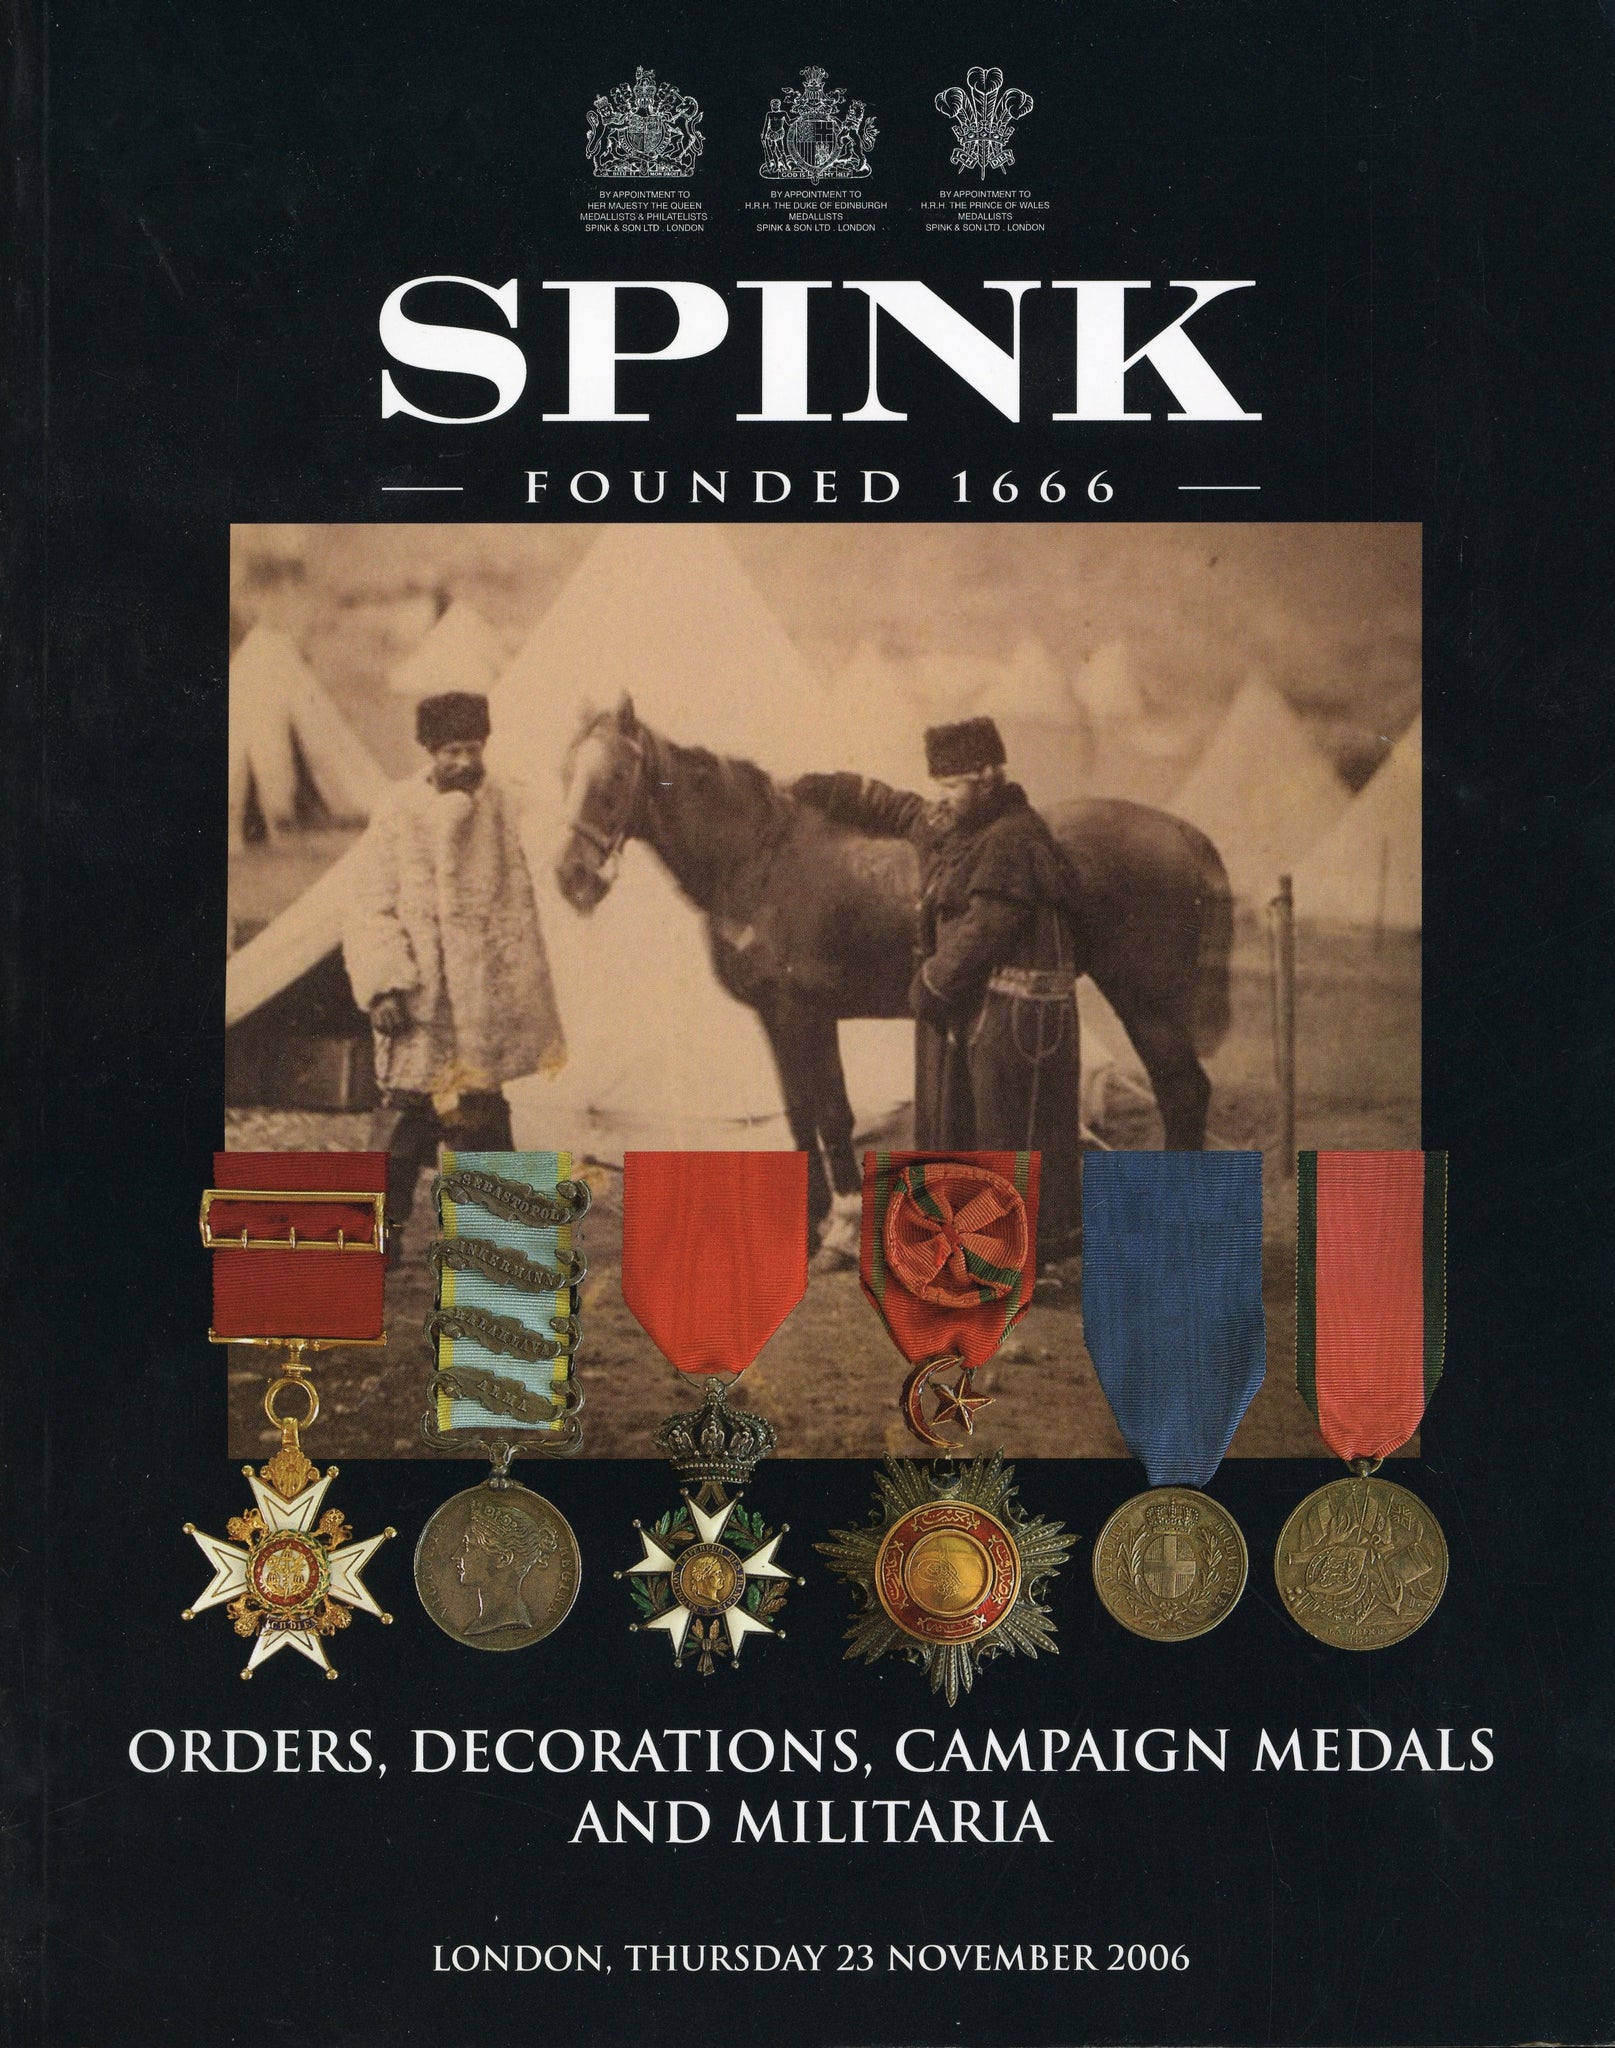 Orders, Decorations, Campaign Medals and Militaria - Thursday 23 November 2006 - Spink London